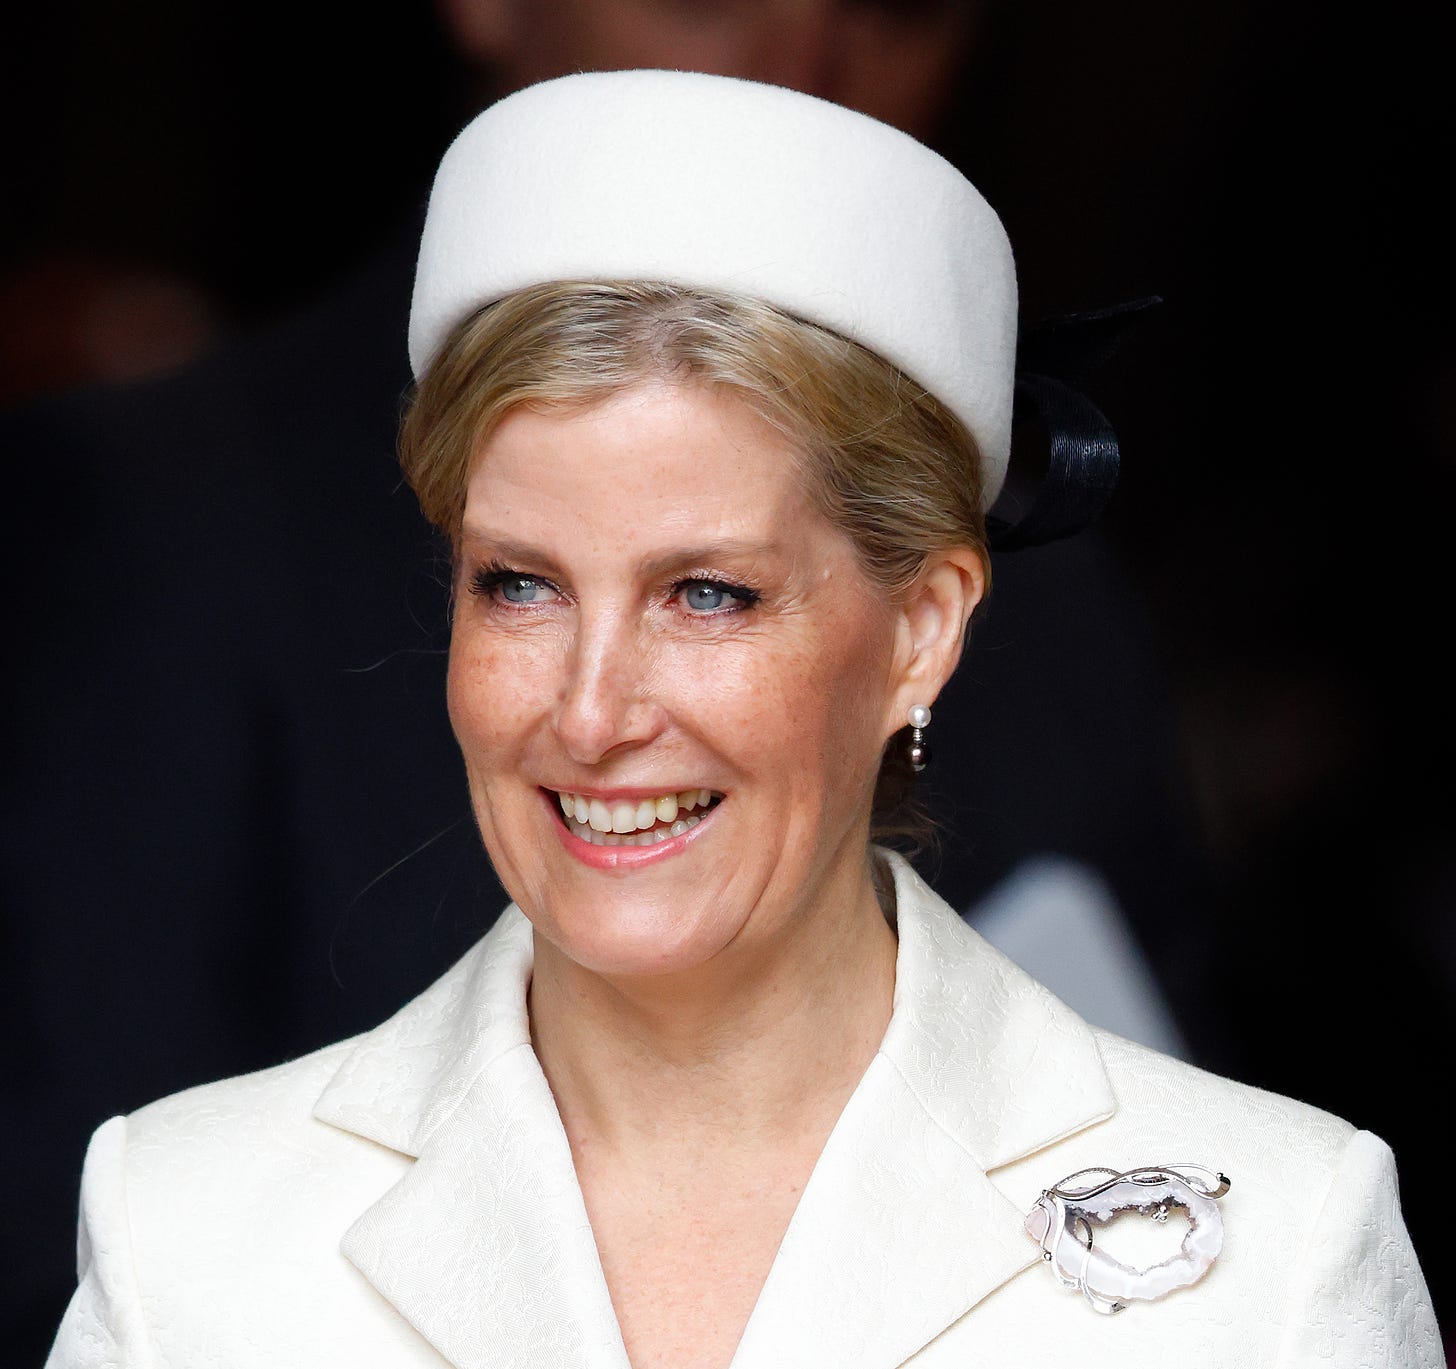 sophie duchess of edinburgh wearing white outfit and hat